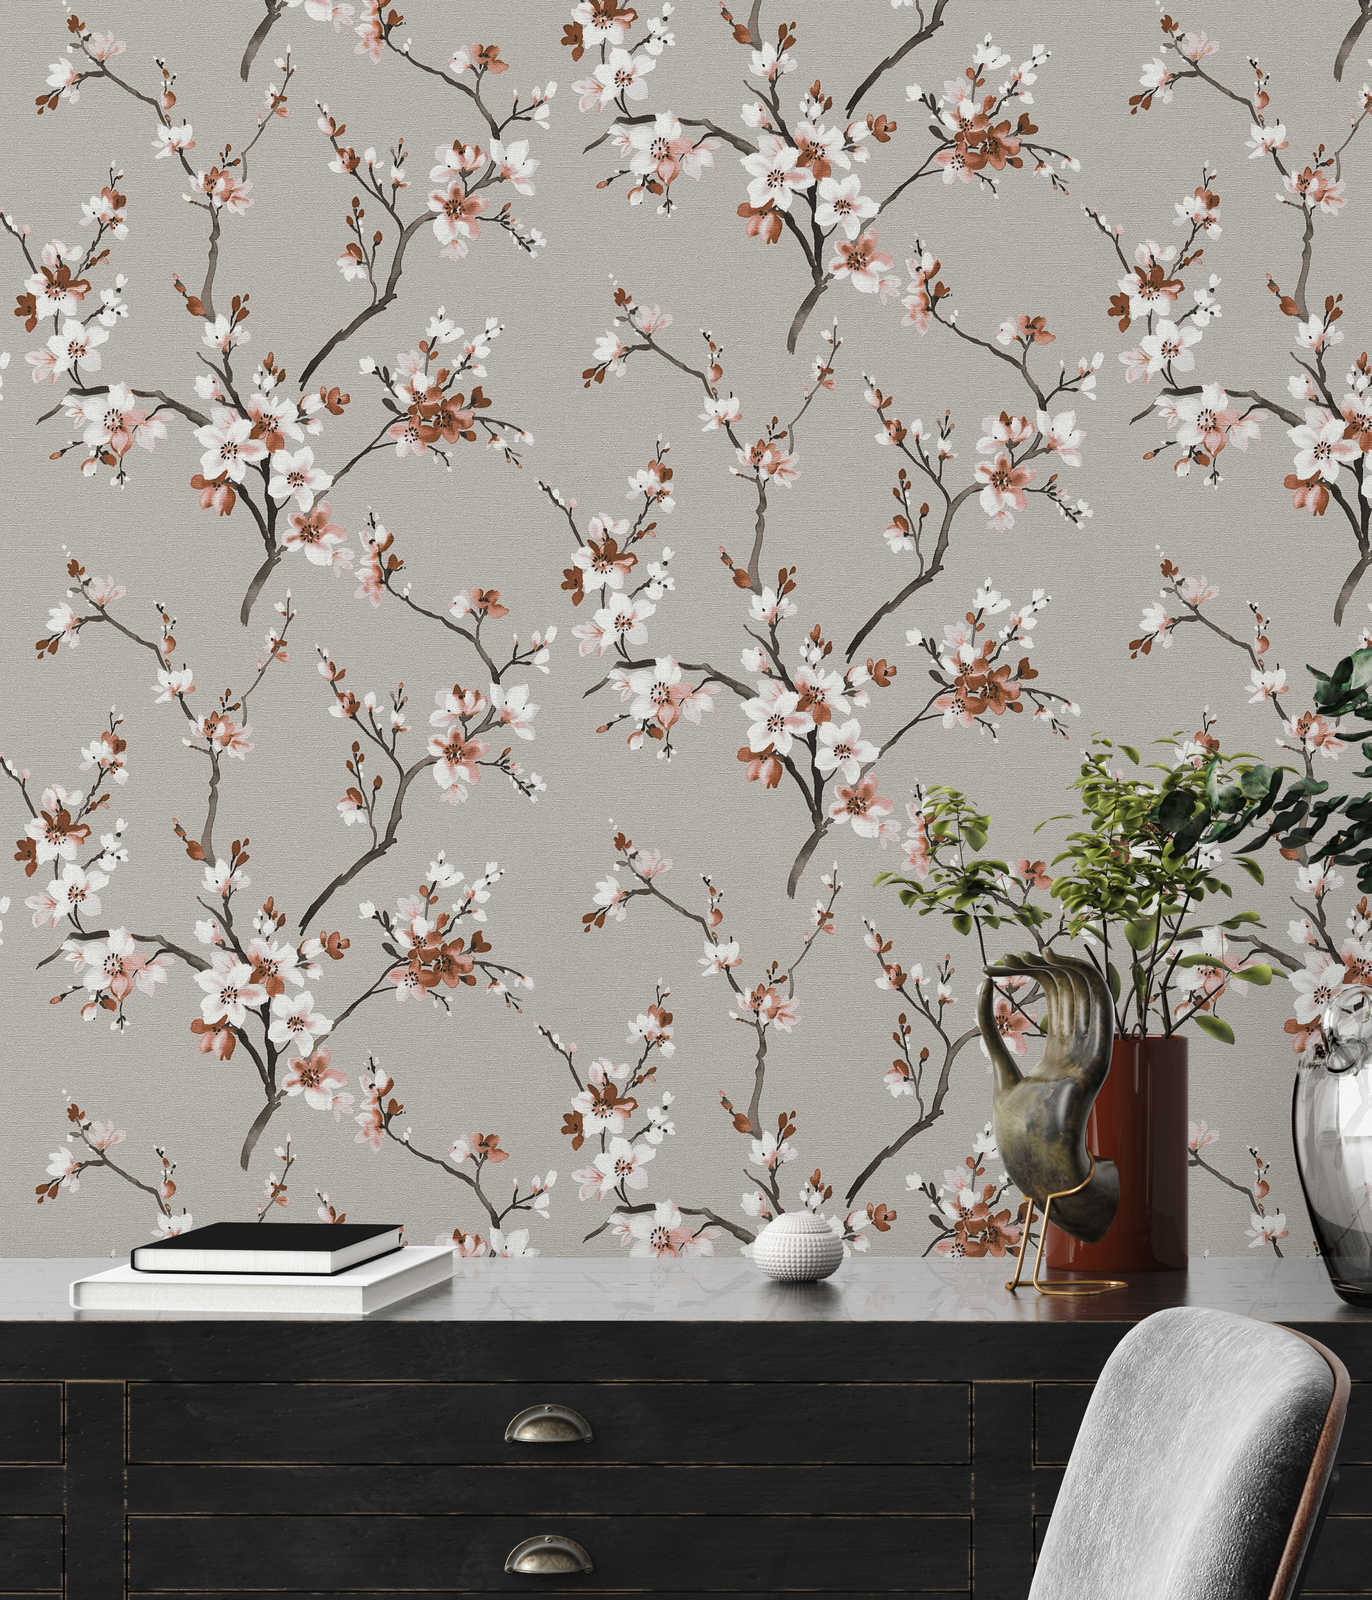             Floral wallpaper grey with brown watercolour flowers
        